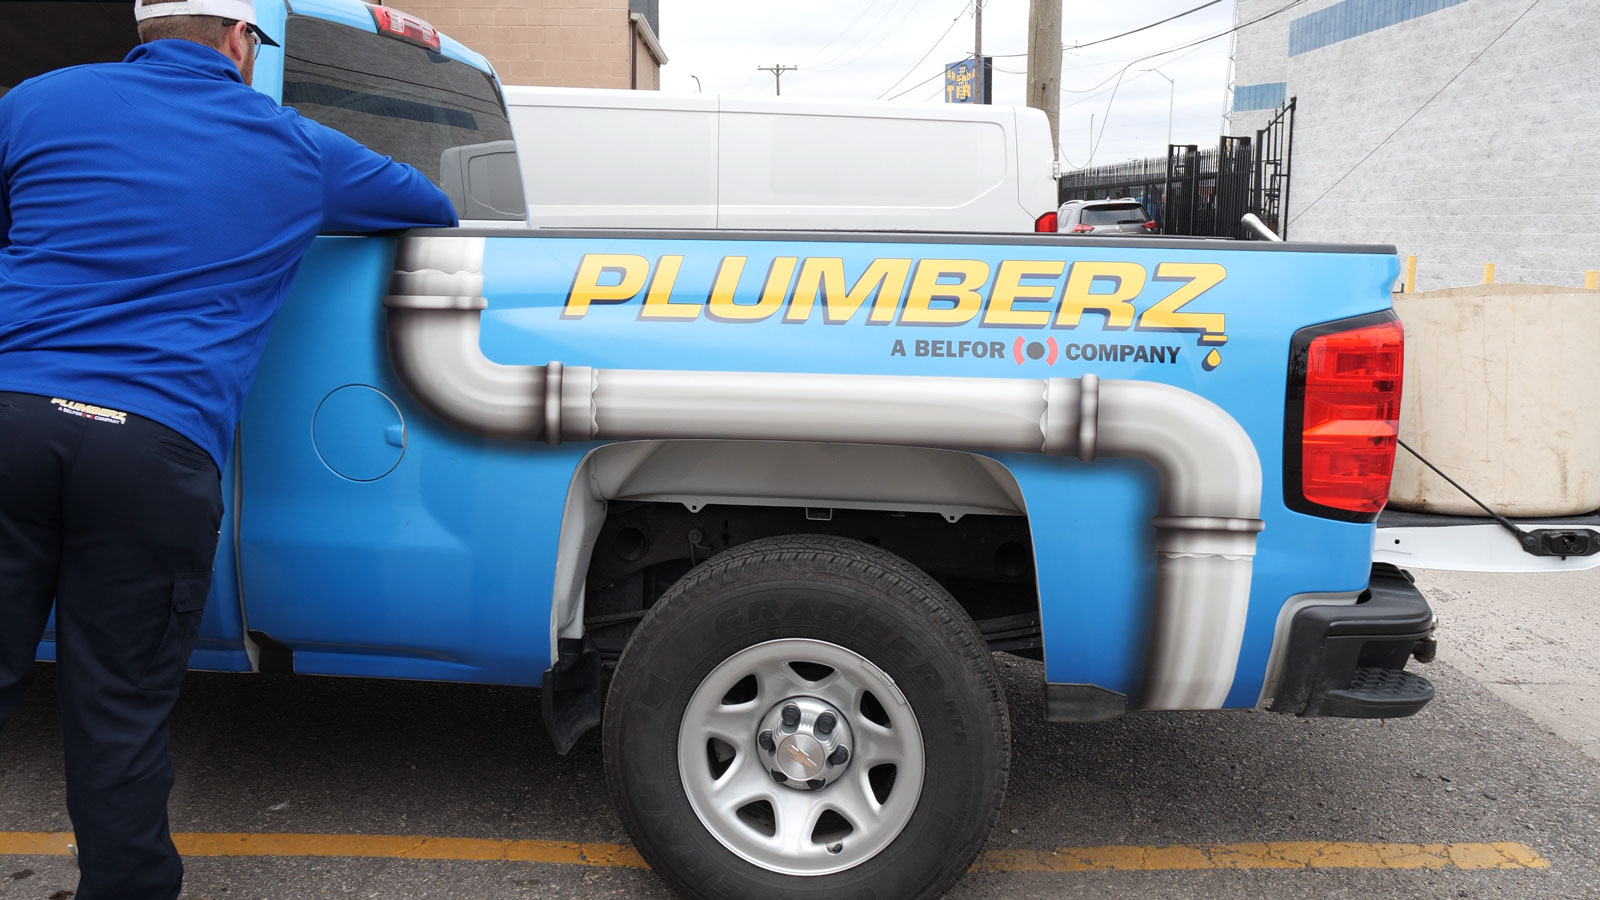 PLUMBERZ truck and worker